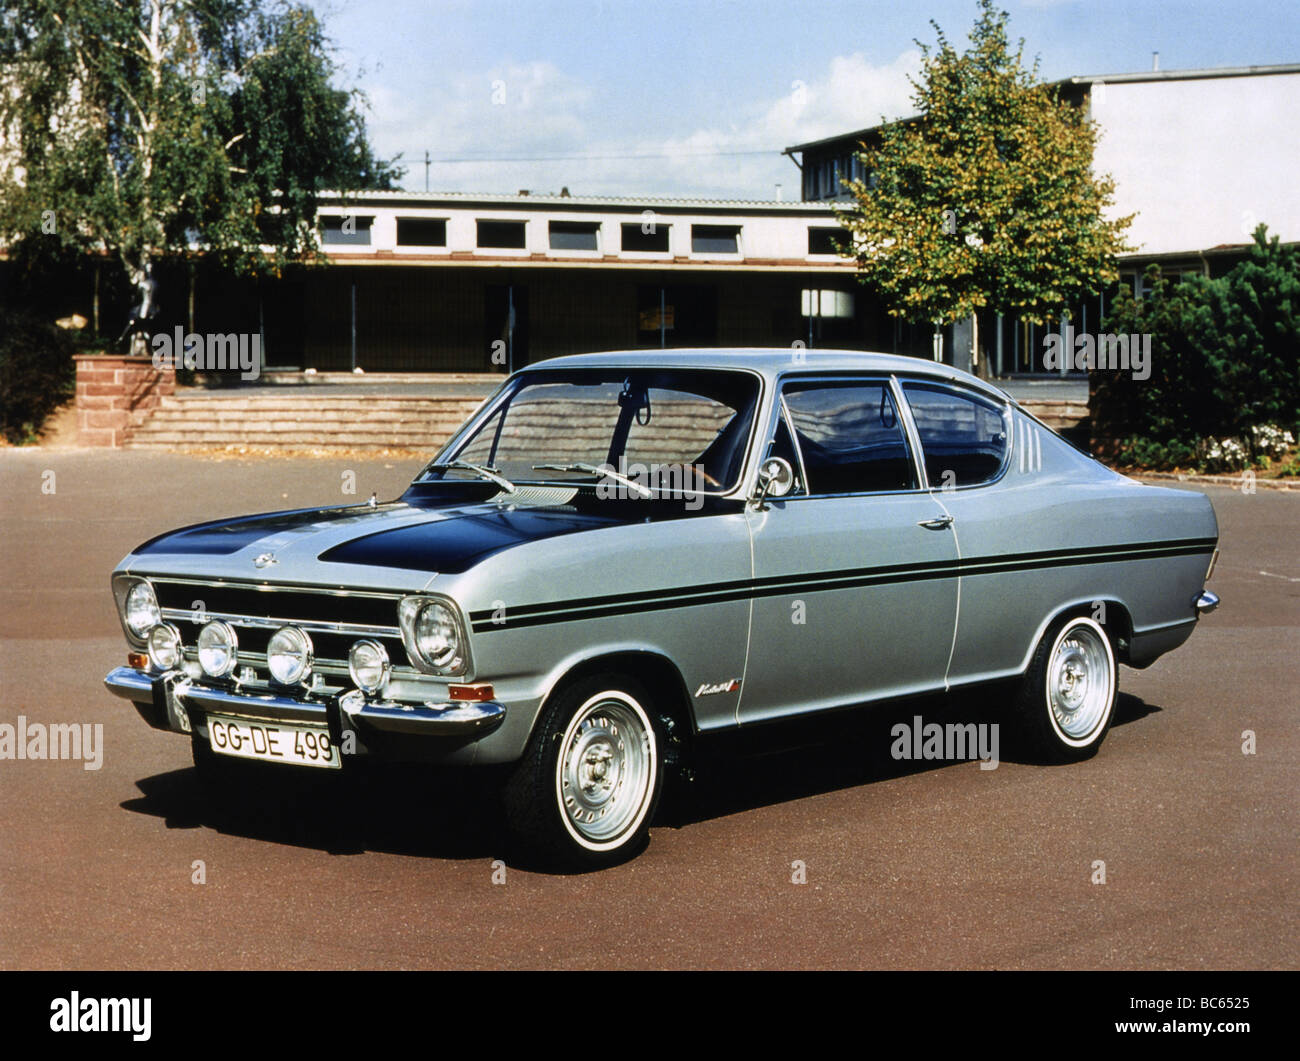 1967 Opel Kadett High Resolution Stock Photography and Images - Alamy